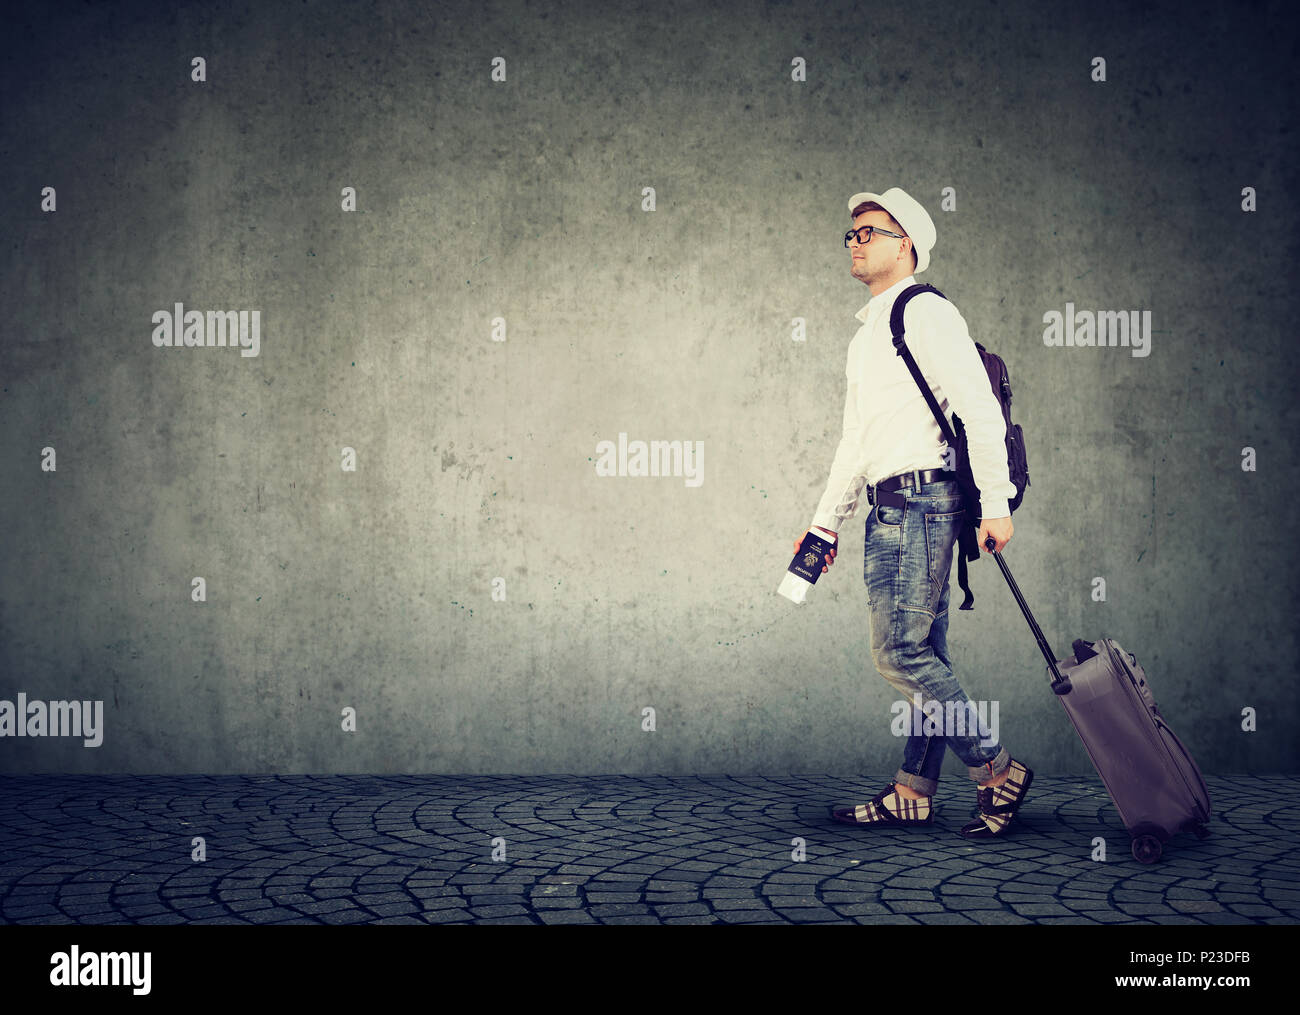 Man Backpack Airport Stock Photos & Man Backpack Airport Stock Images - Alamy